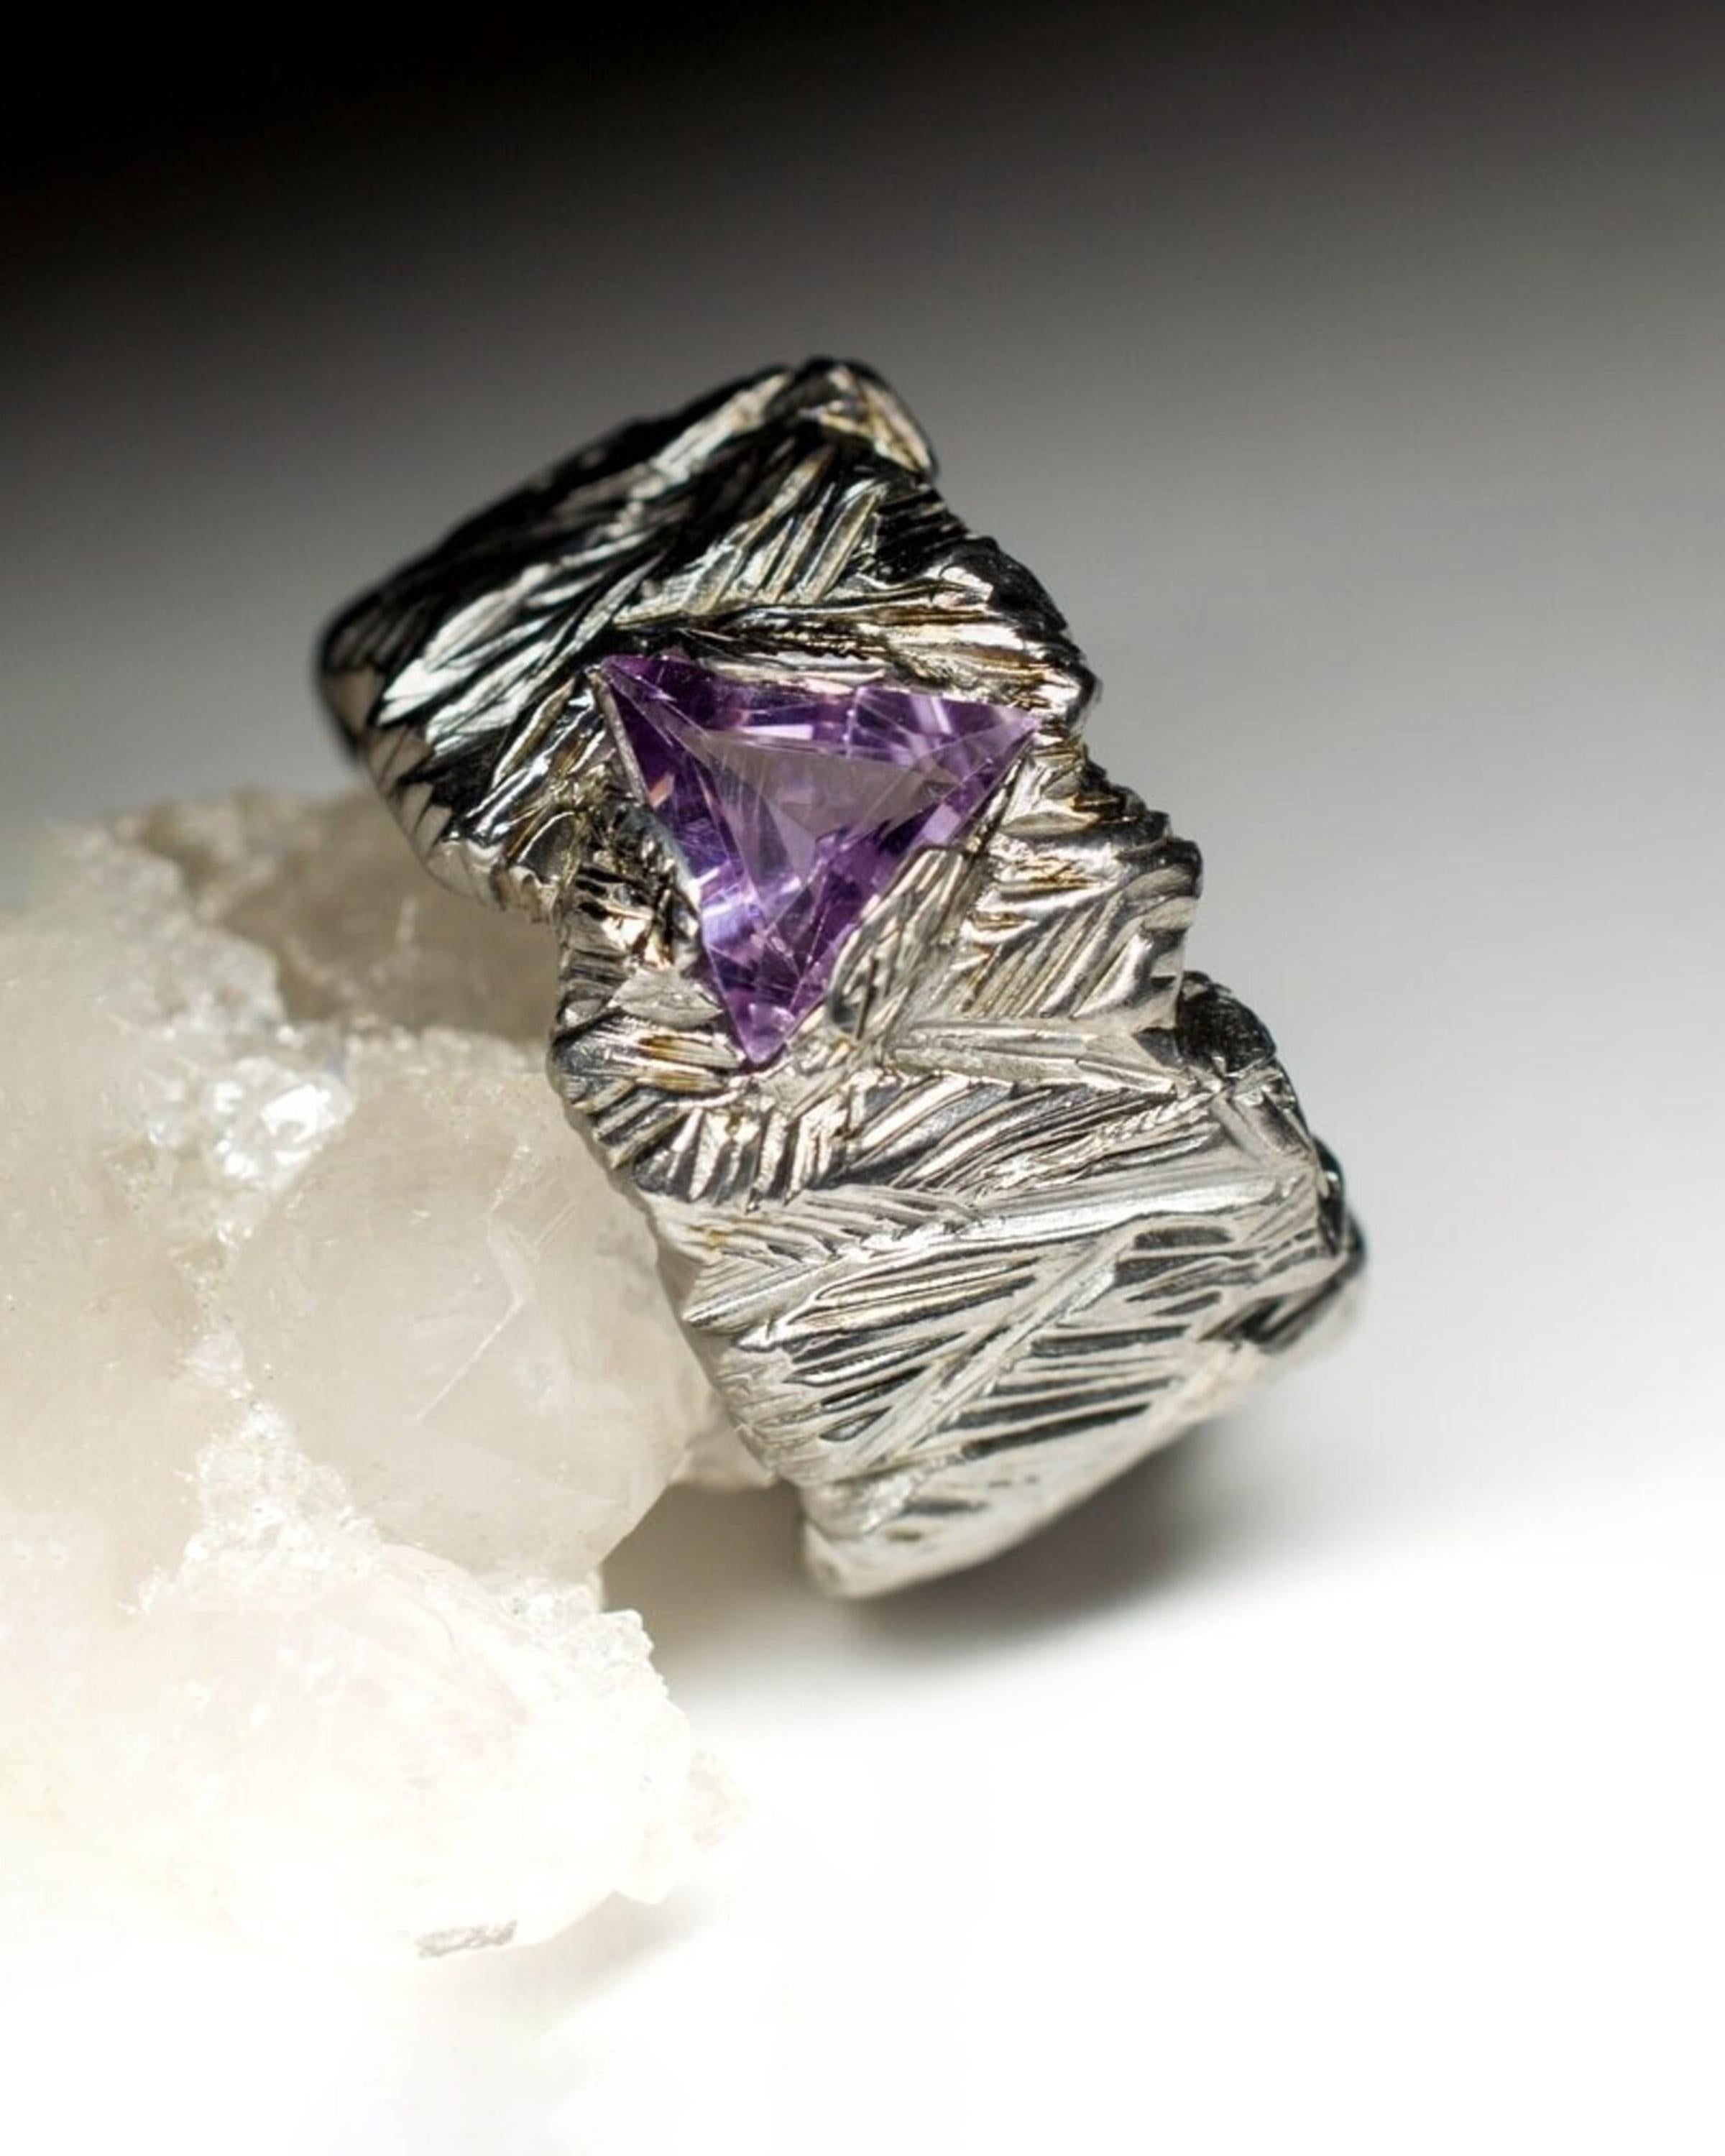 Large wide band silver black patina ring with natural triangle cut Amethyst
amethyst origin - Brazil
ring weight - 12.27 grams
ring size  - 7 1/4 US
stone measurements - 0.16 x 0.28 x 0.28 in / 4 x 7 x 7 mm 